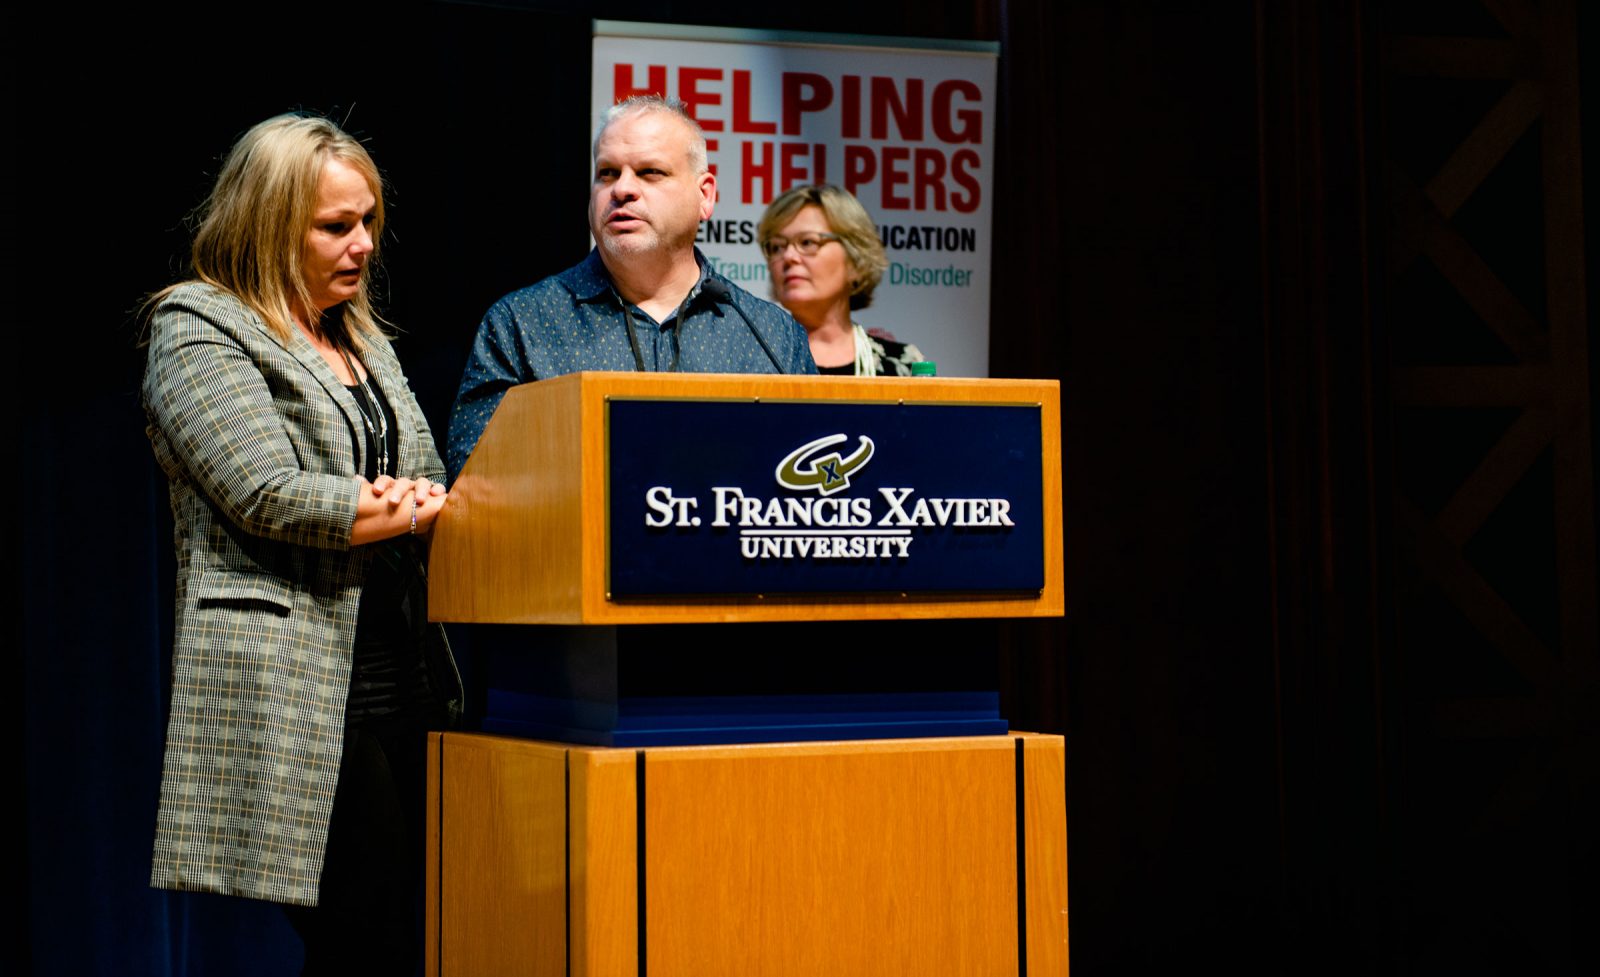 6th Annual 'Helping the Helpers’ Awareness and Education Day For Post-Traumatic Stress Disorder